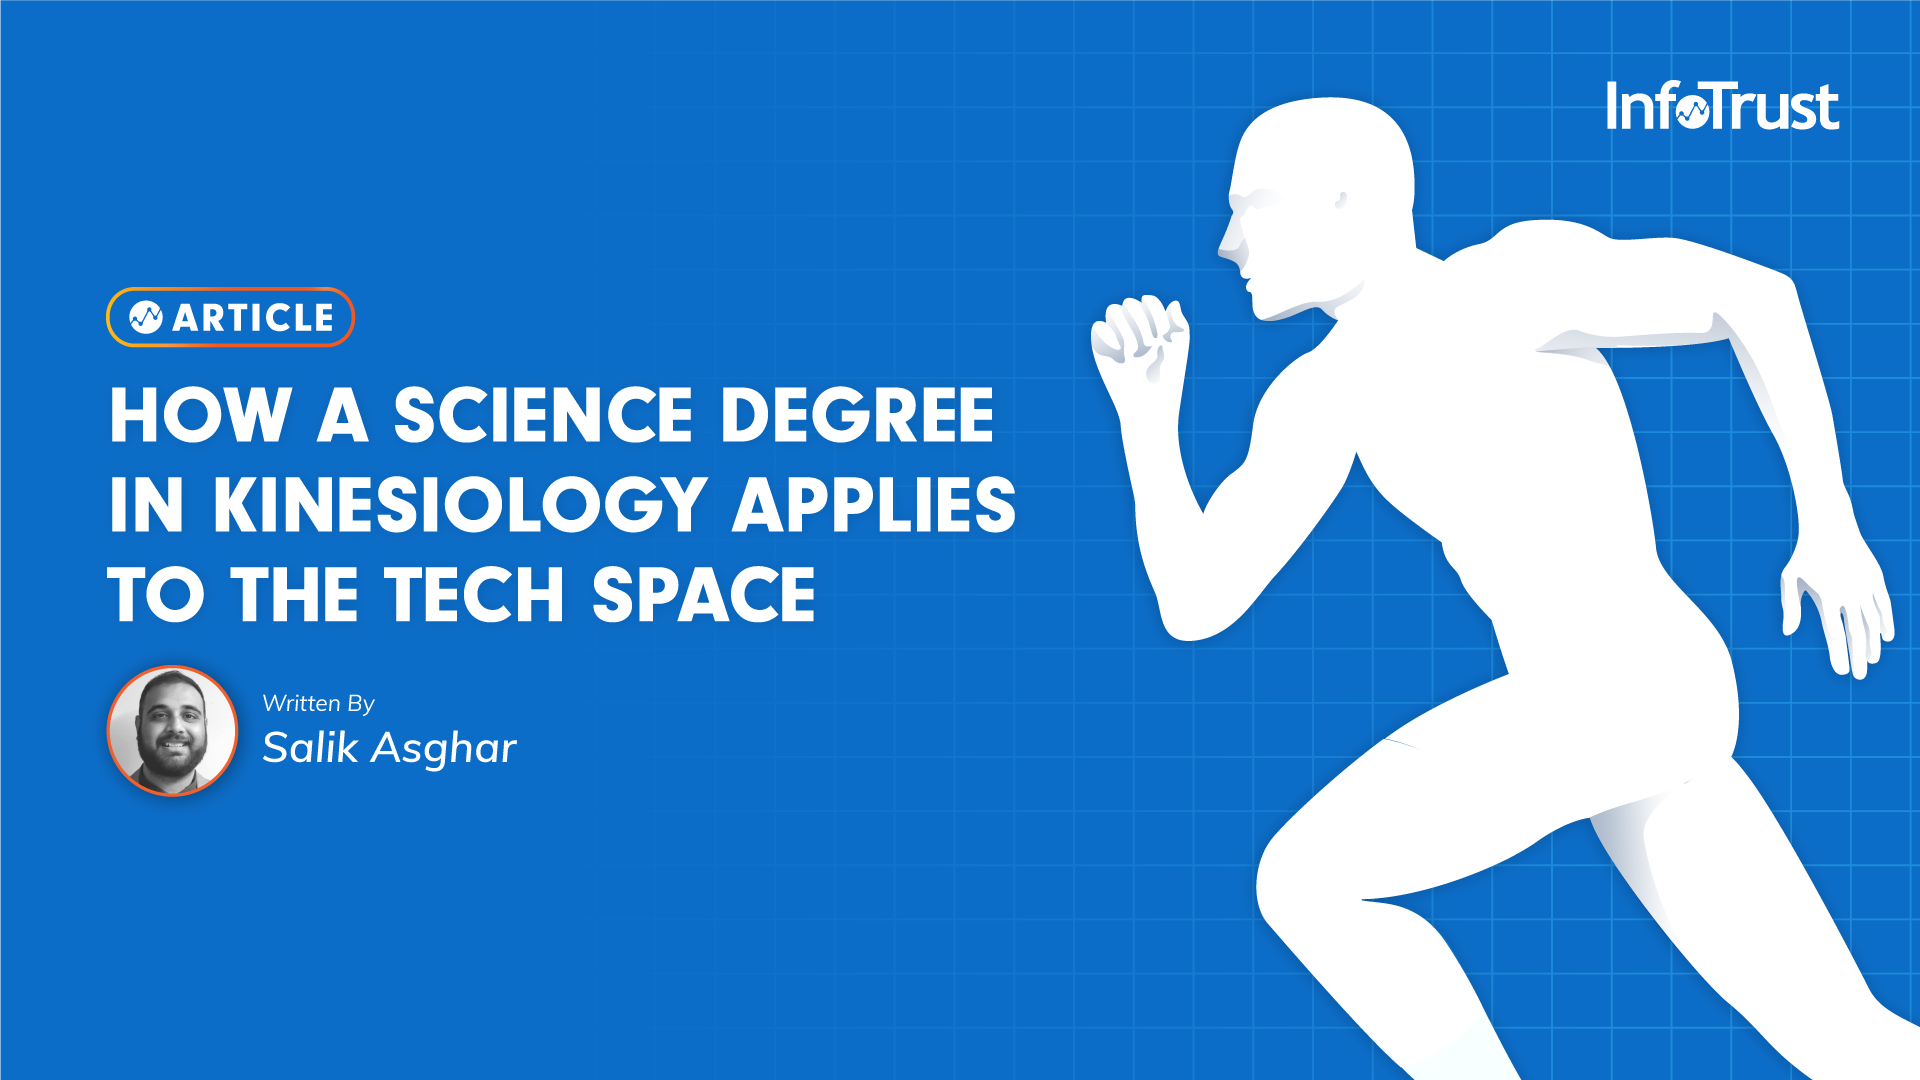 How a Science Degree in Kinesiology Applies to the Tech Space